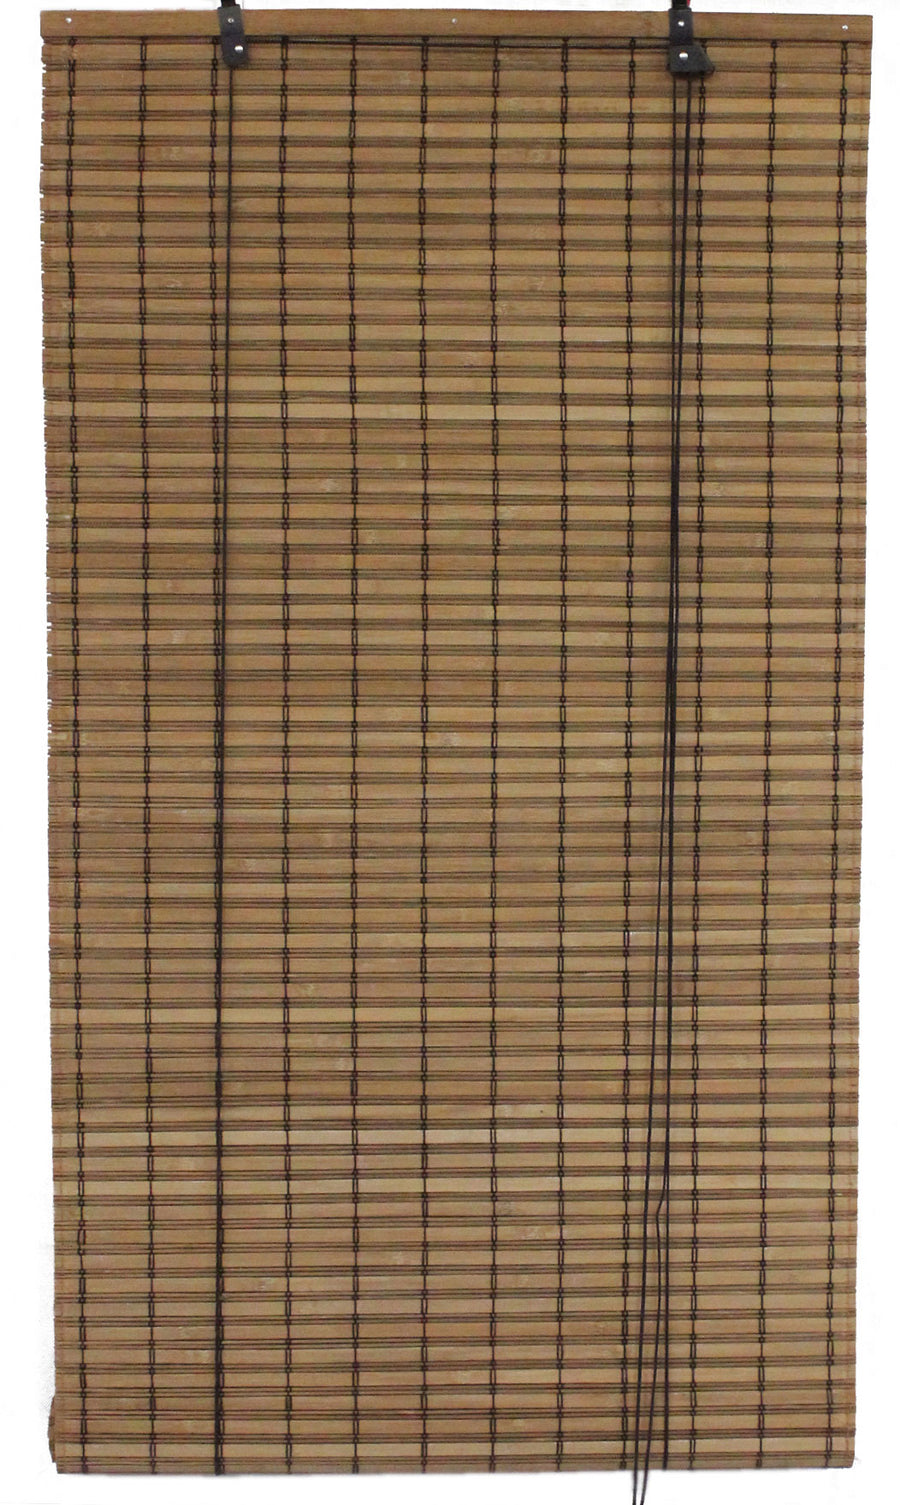 Brown Carbonized Bamboo Slat Roll Up Blind